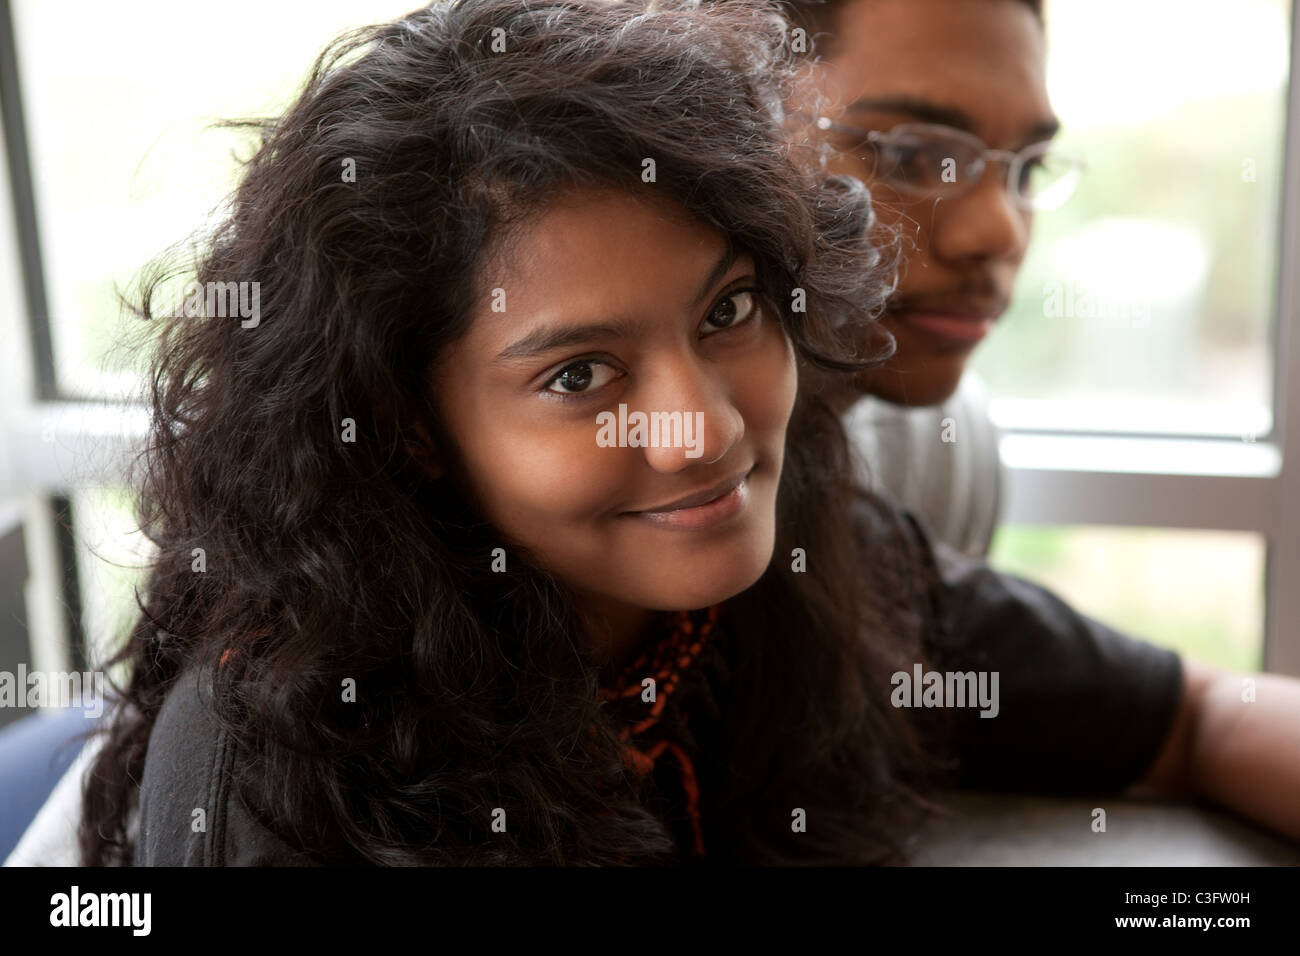 Couple hanging out in cafe Stock Photo